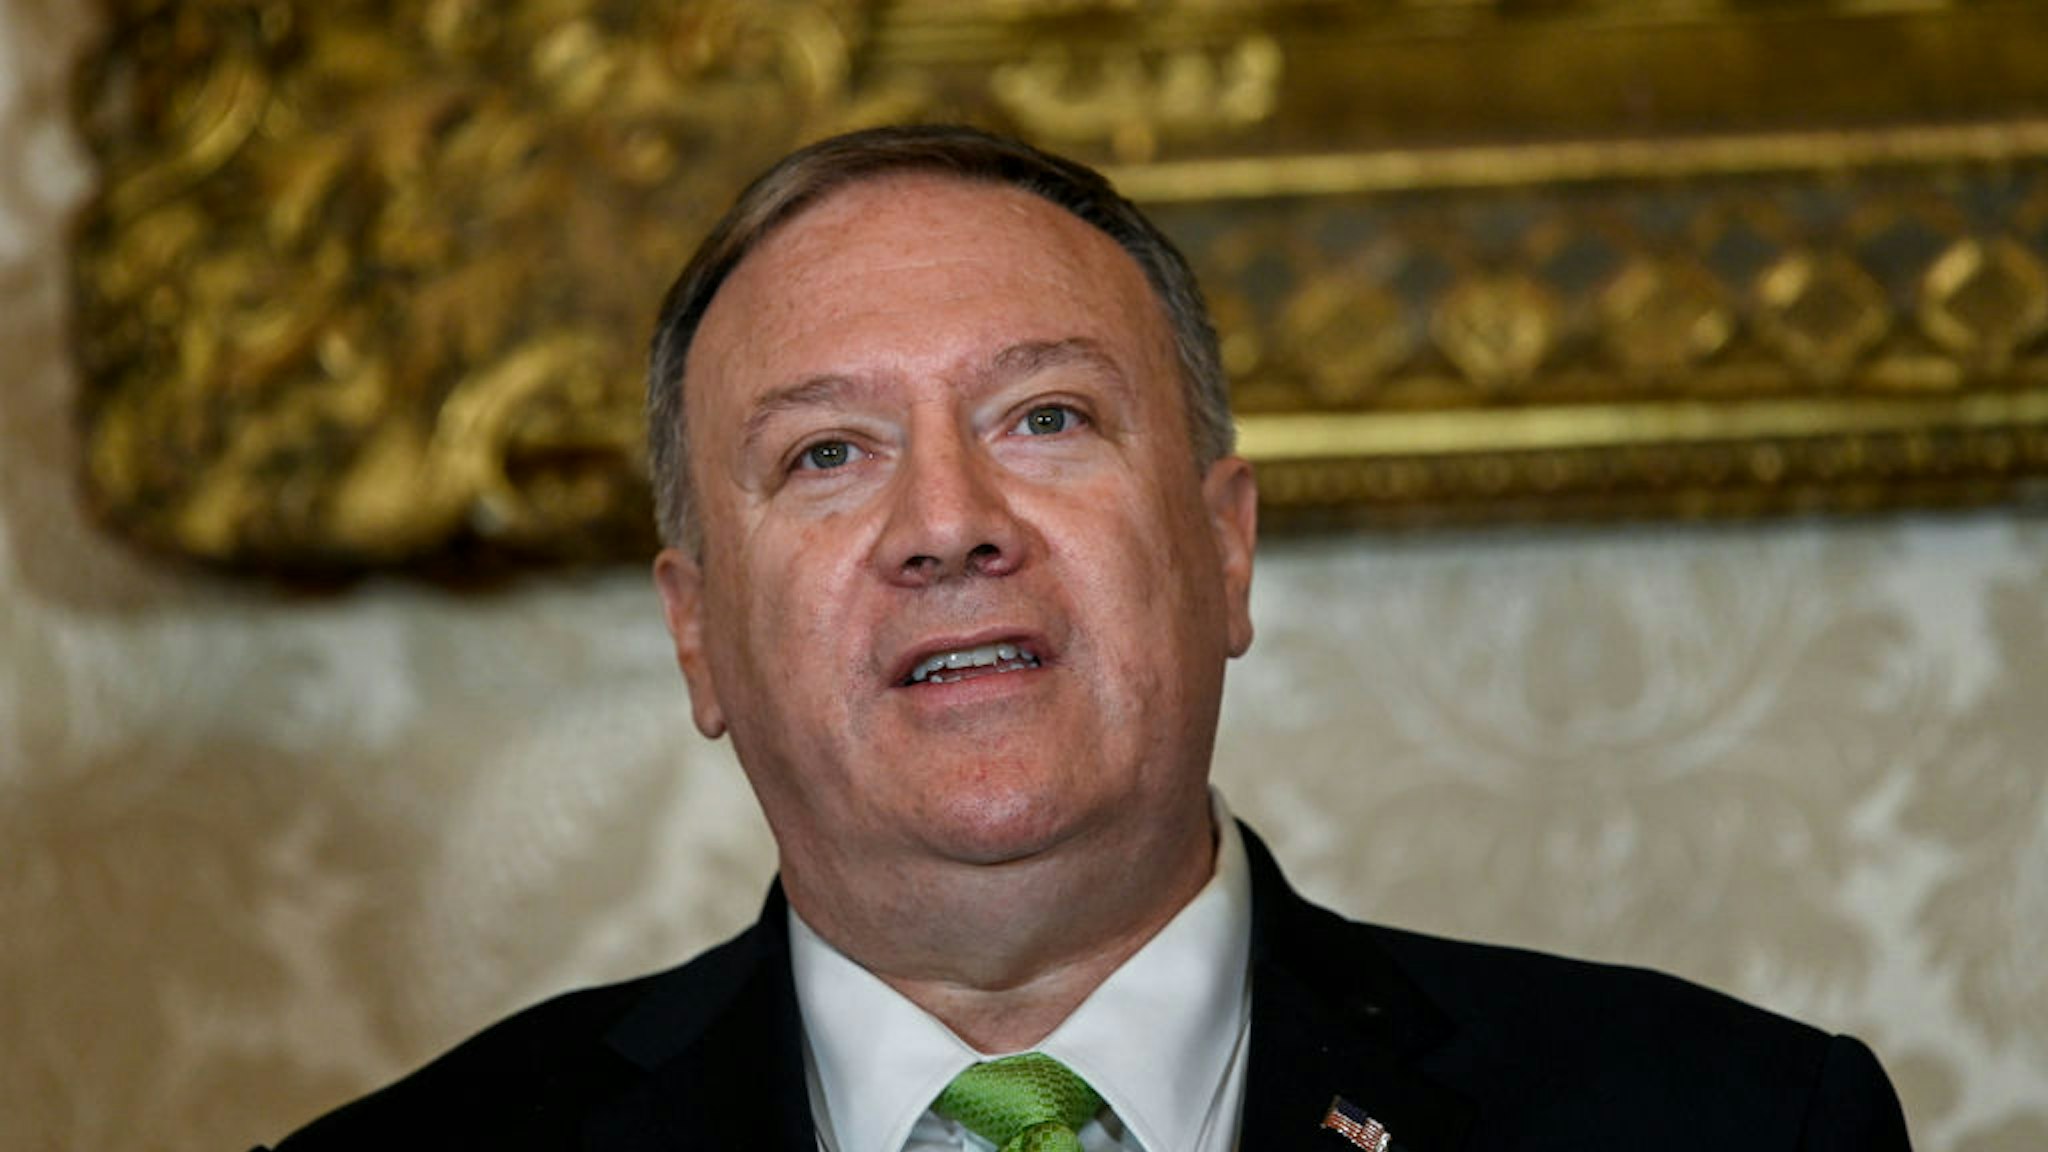 US Secretary of State Mike Pompeo and Portuguese Foreign Minister Augusto Santos Silva